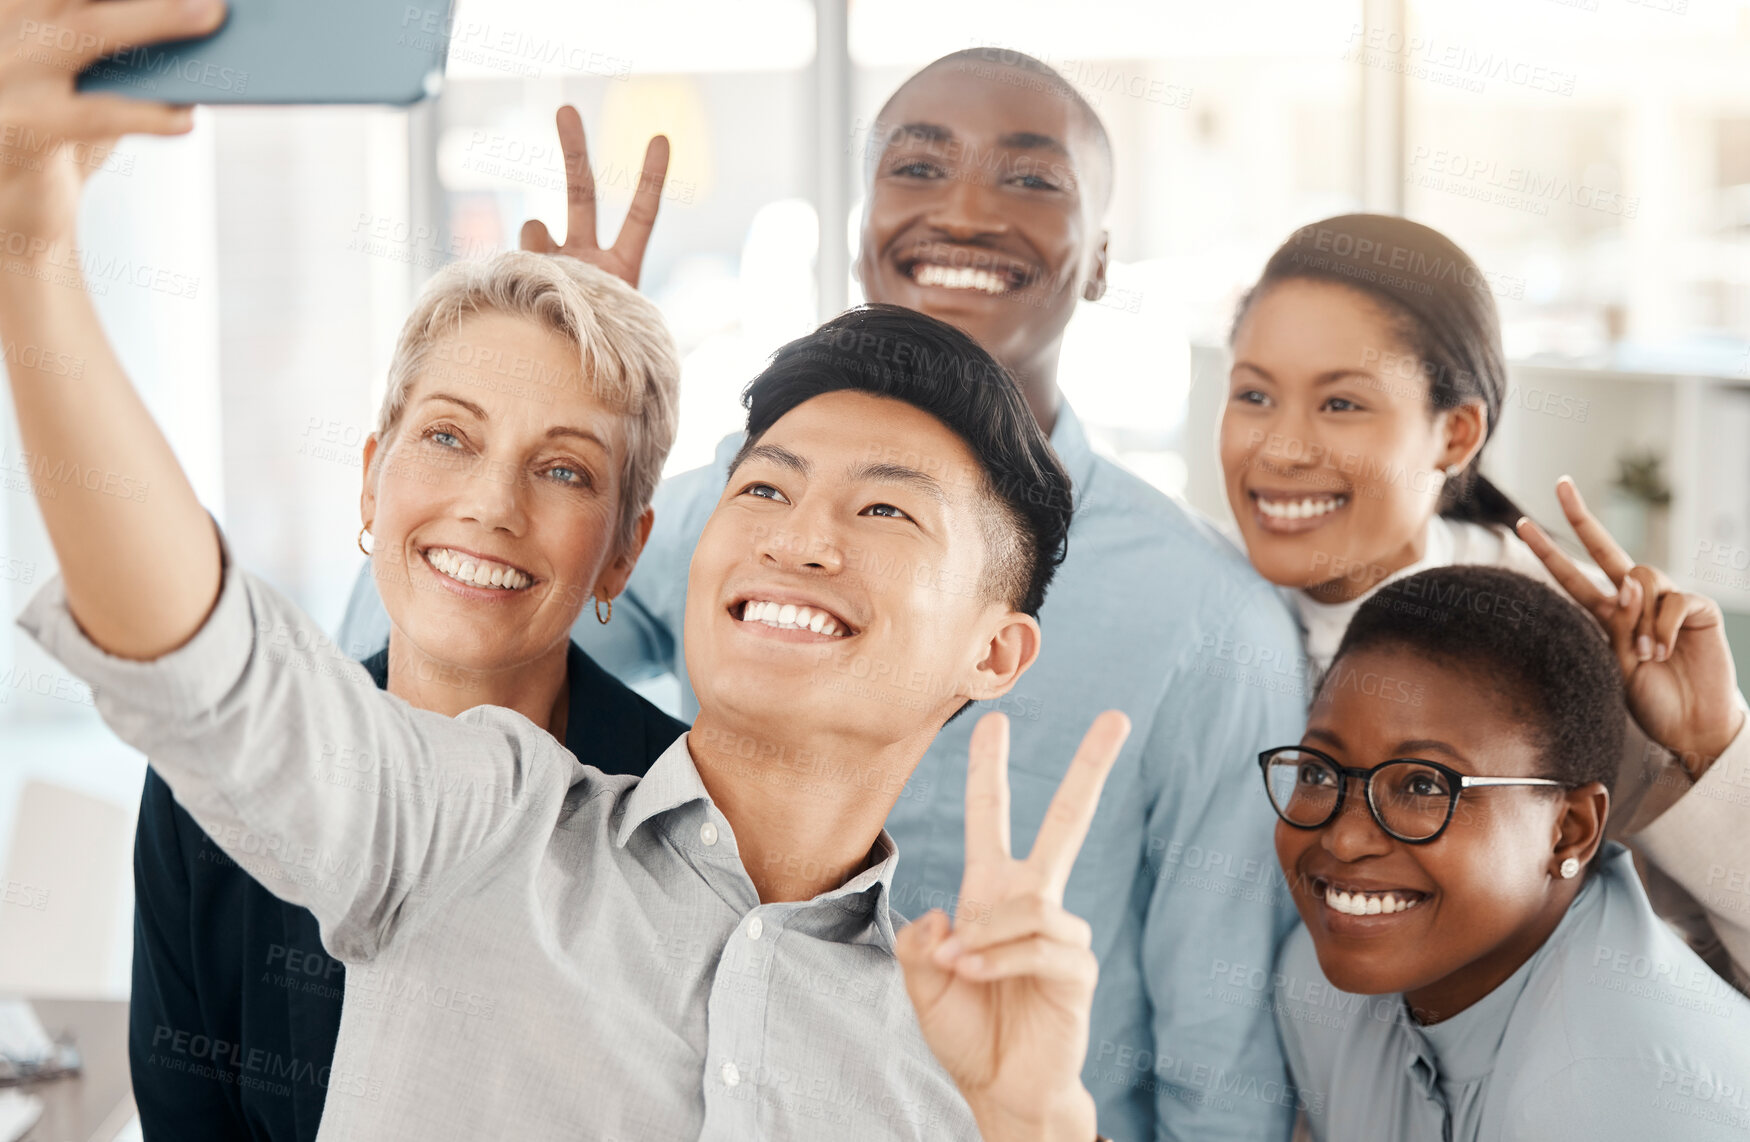 Buy stock photo Team selfie, support and diversity with business people in office, community in workplace and teamwork picture. Partnership, solidarity and working together, happiness and peace gesture at company.